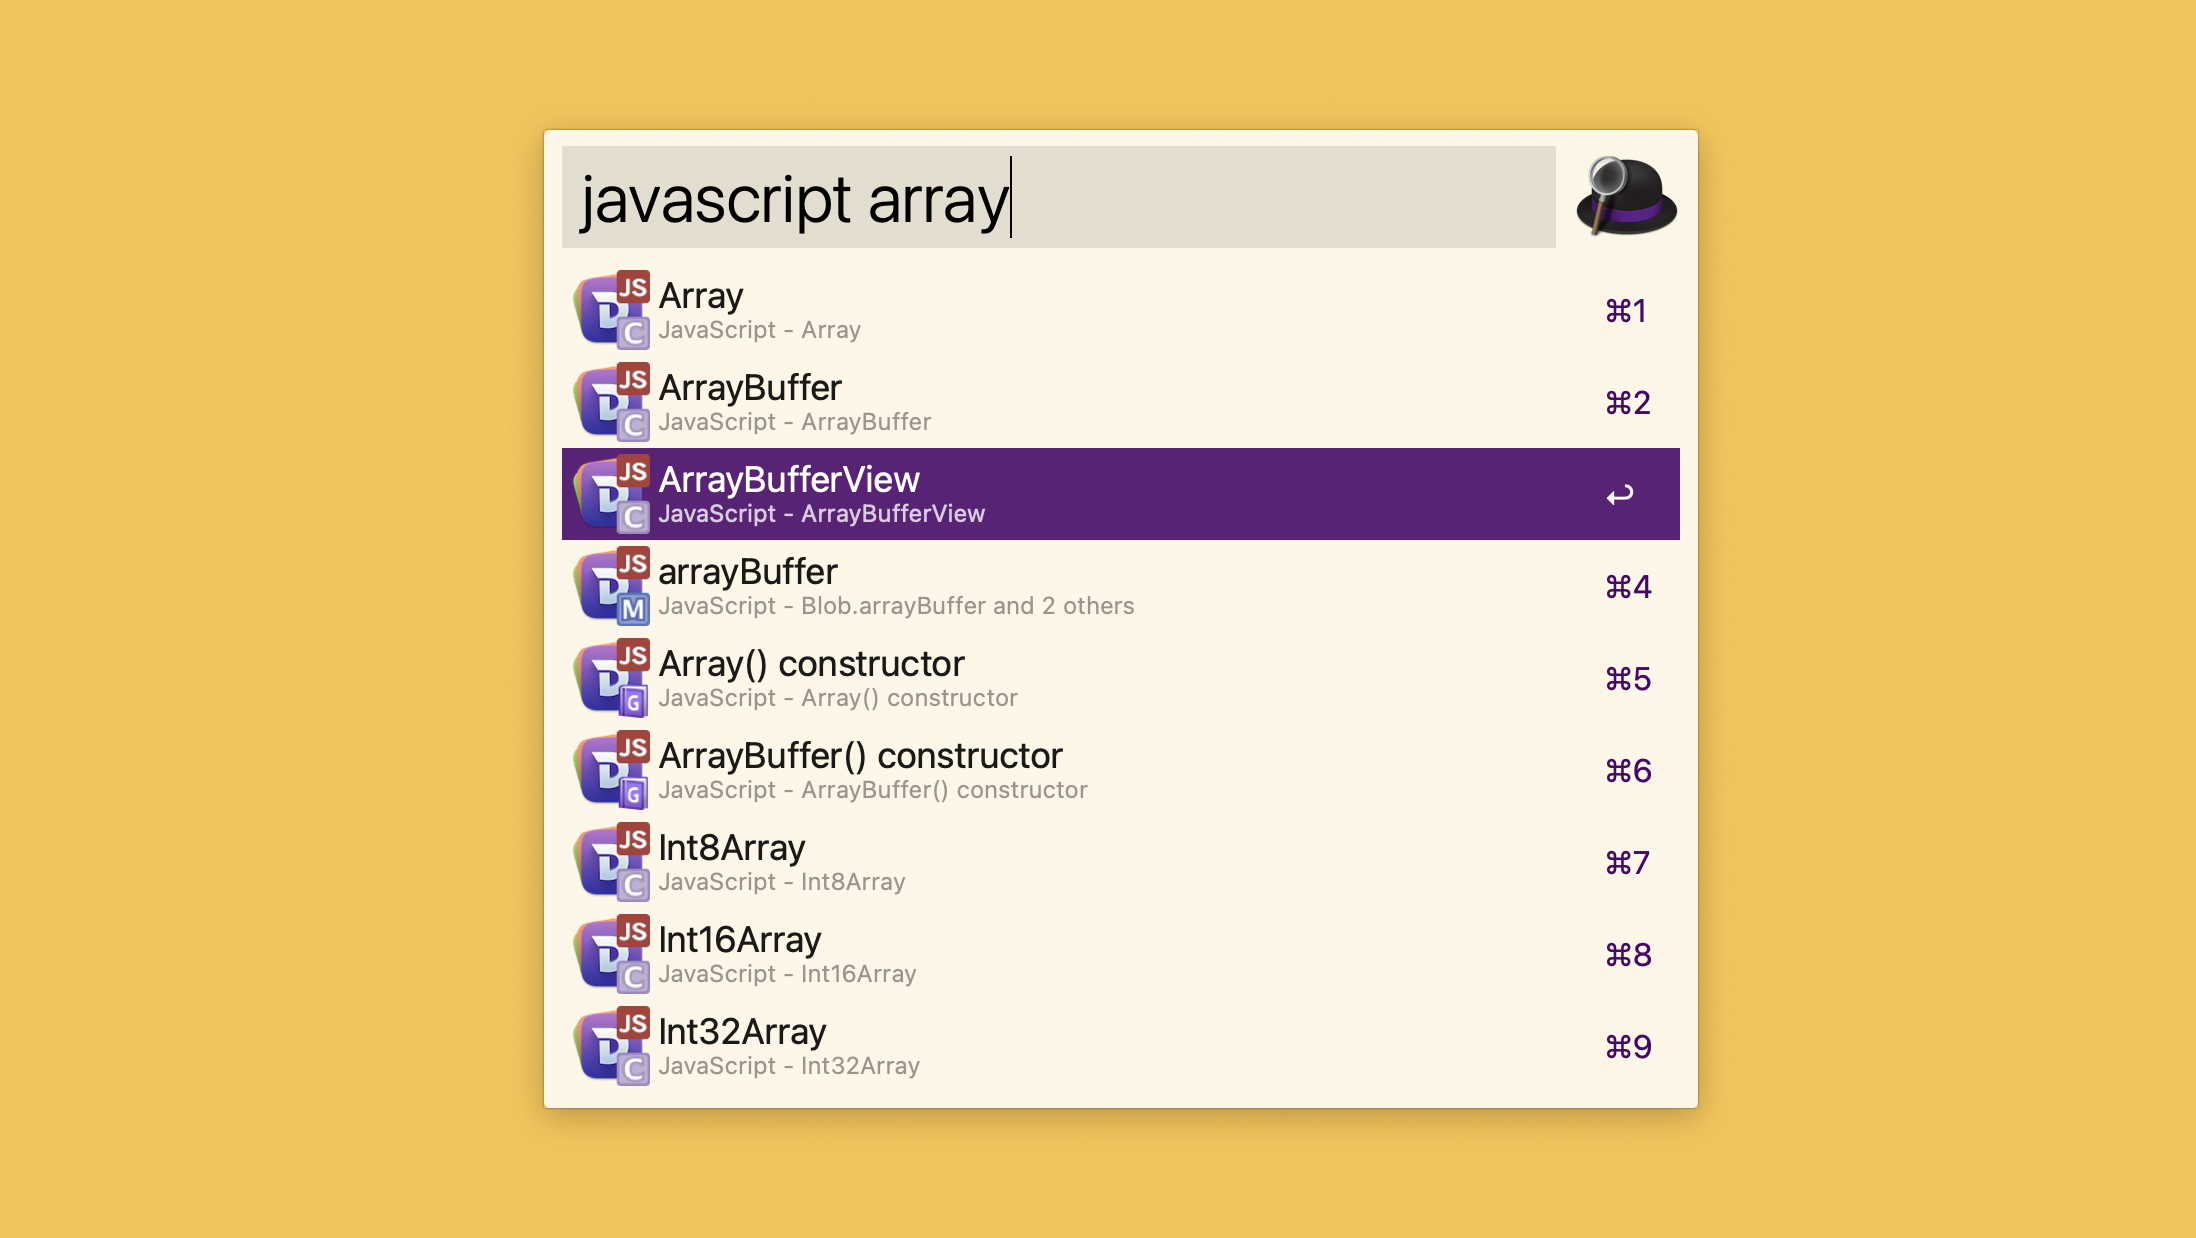 Open Alfred and type in "javascript array" for example.